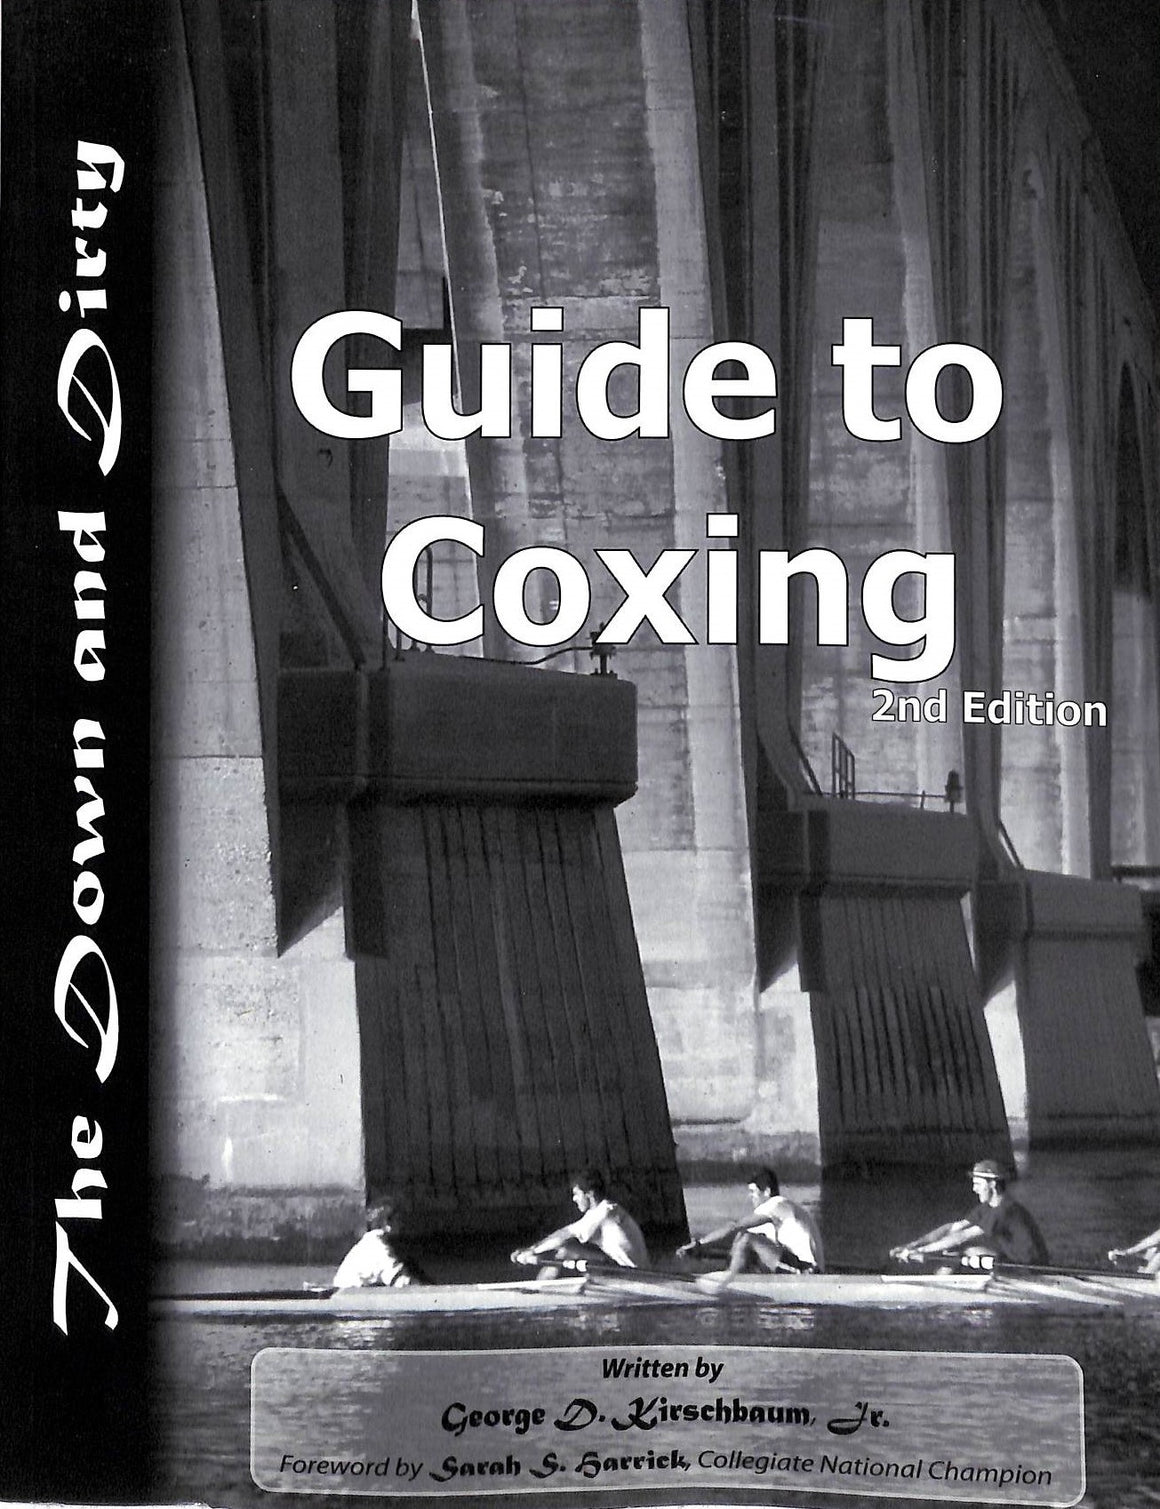 "The Down and Dirty Guide to Coxing" 2002 KIRSCHBAUM, George D., Jr.